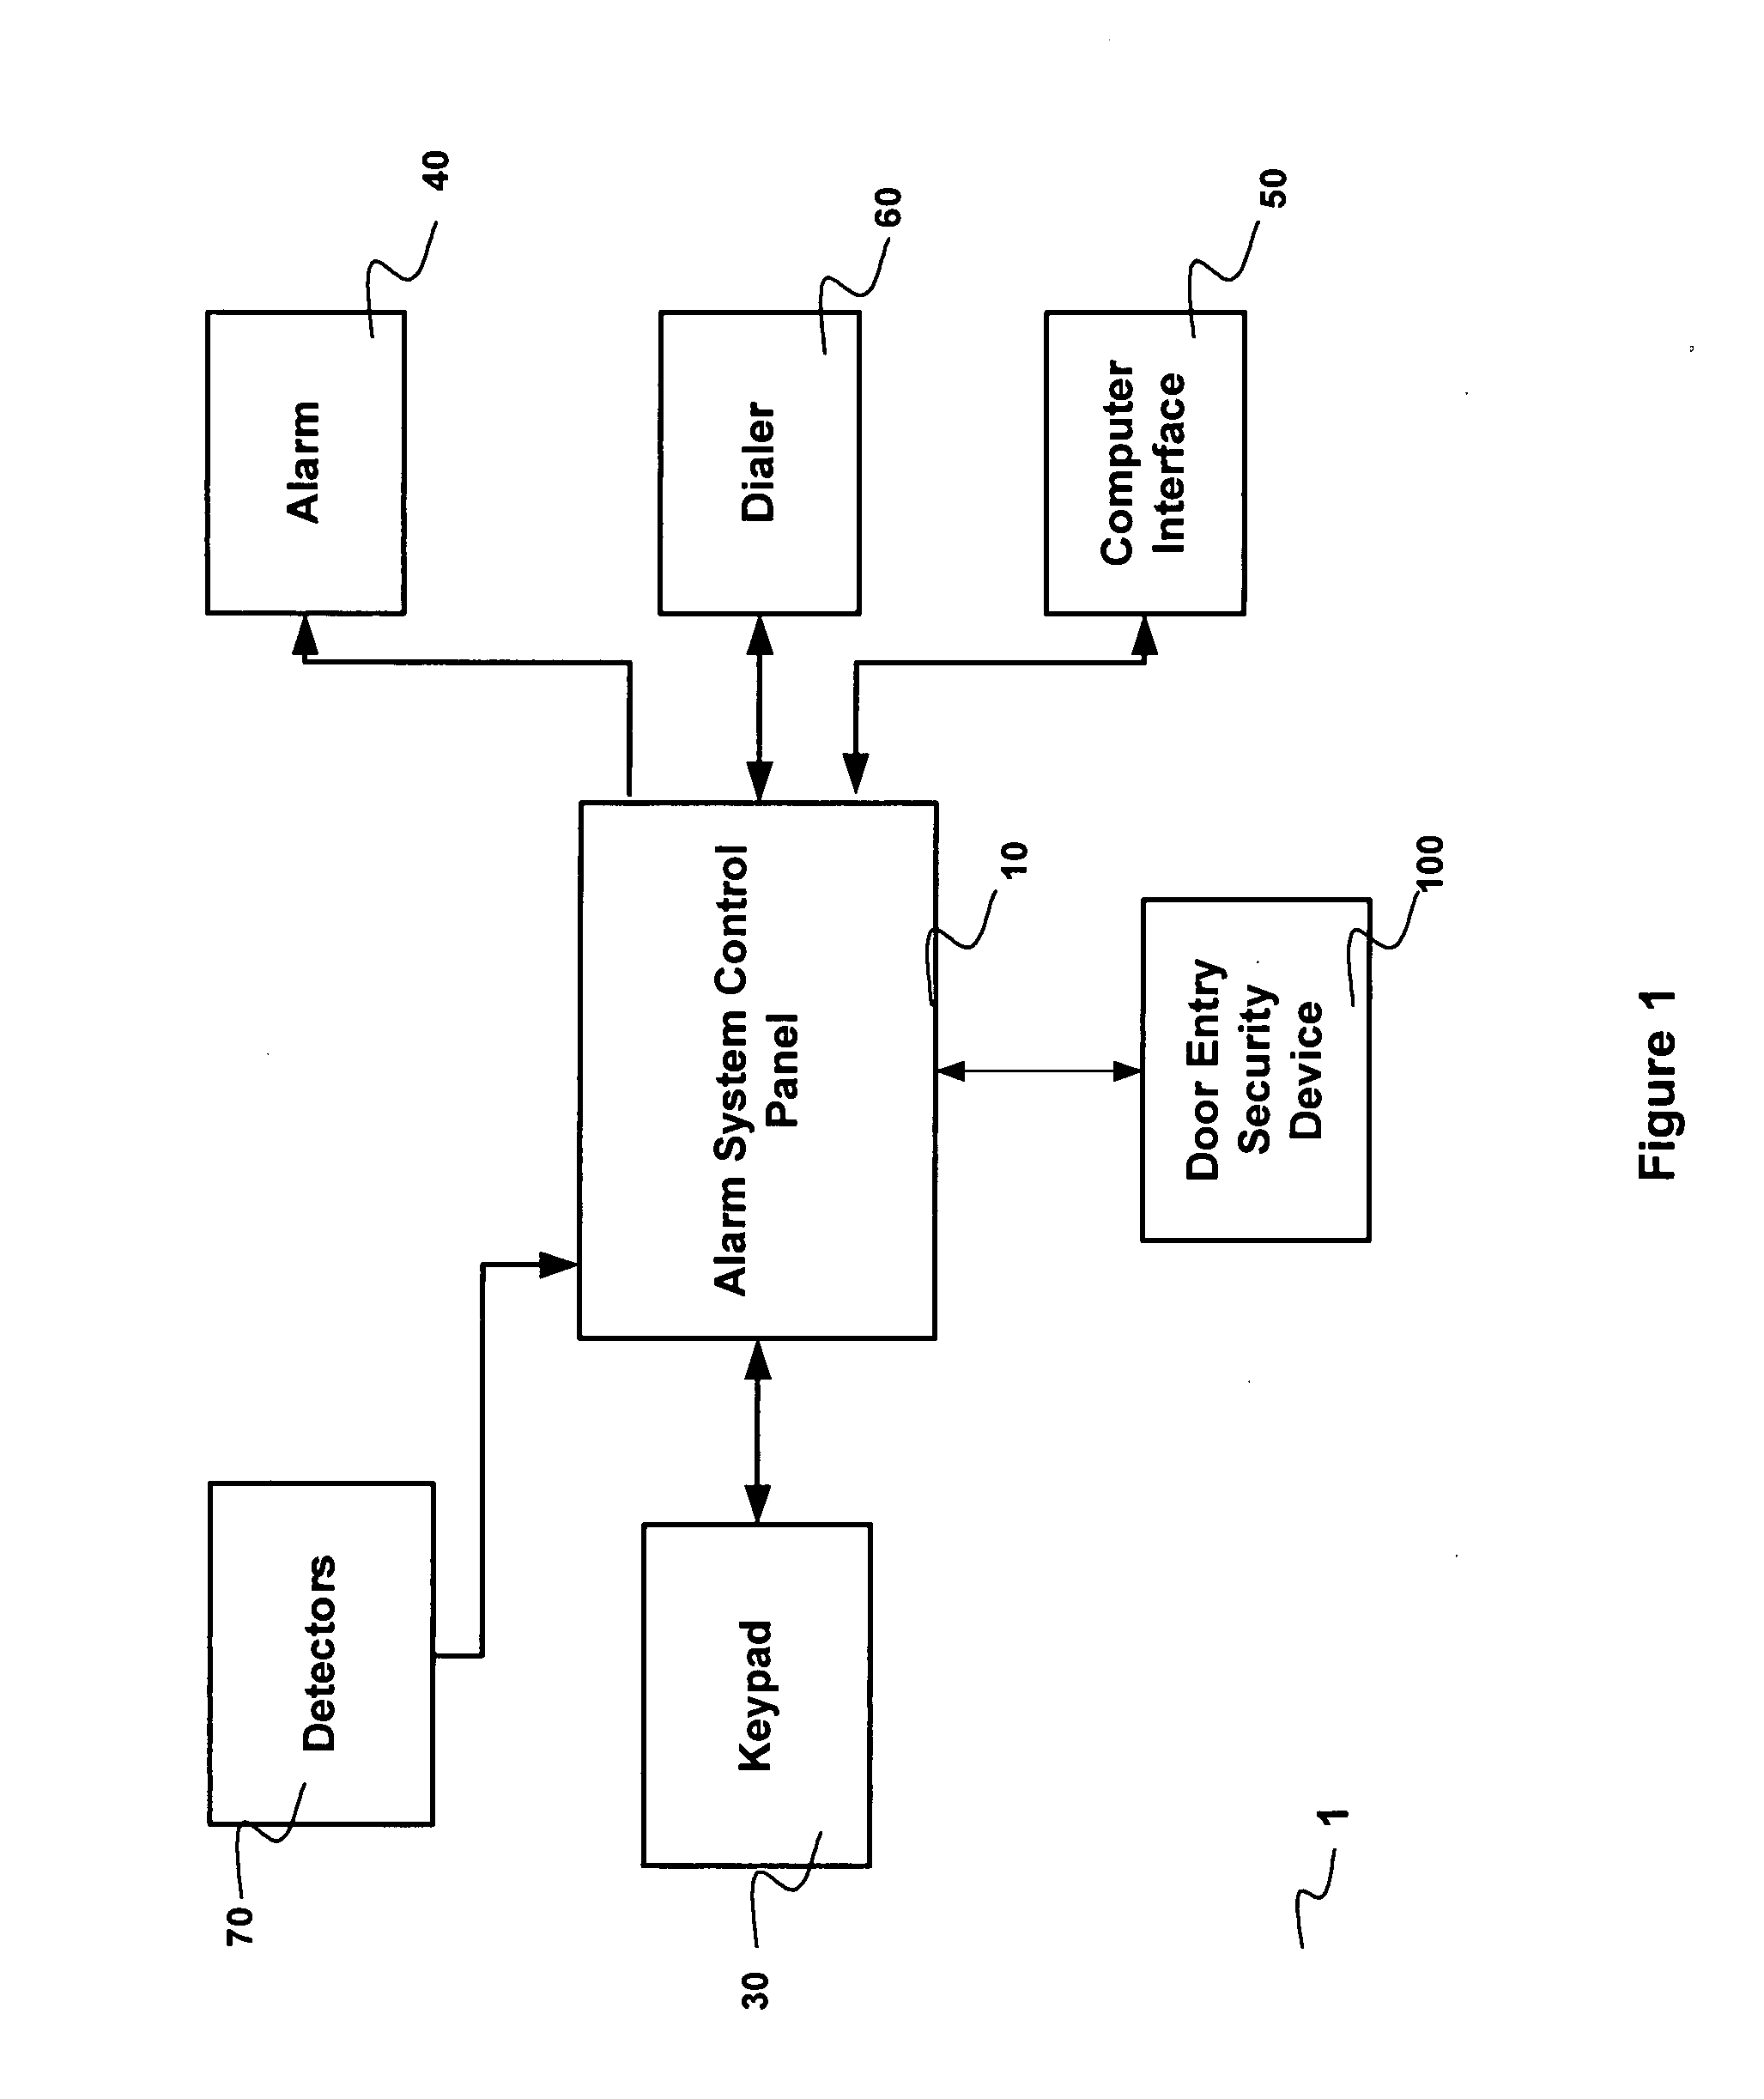 Door entry security device with electronic lock